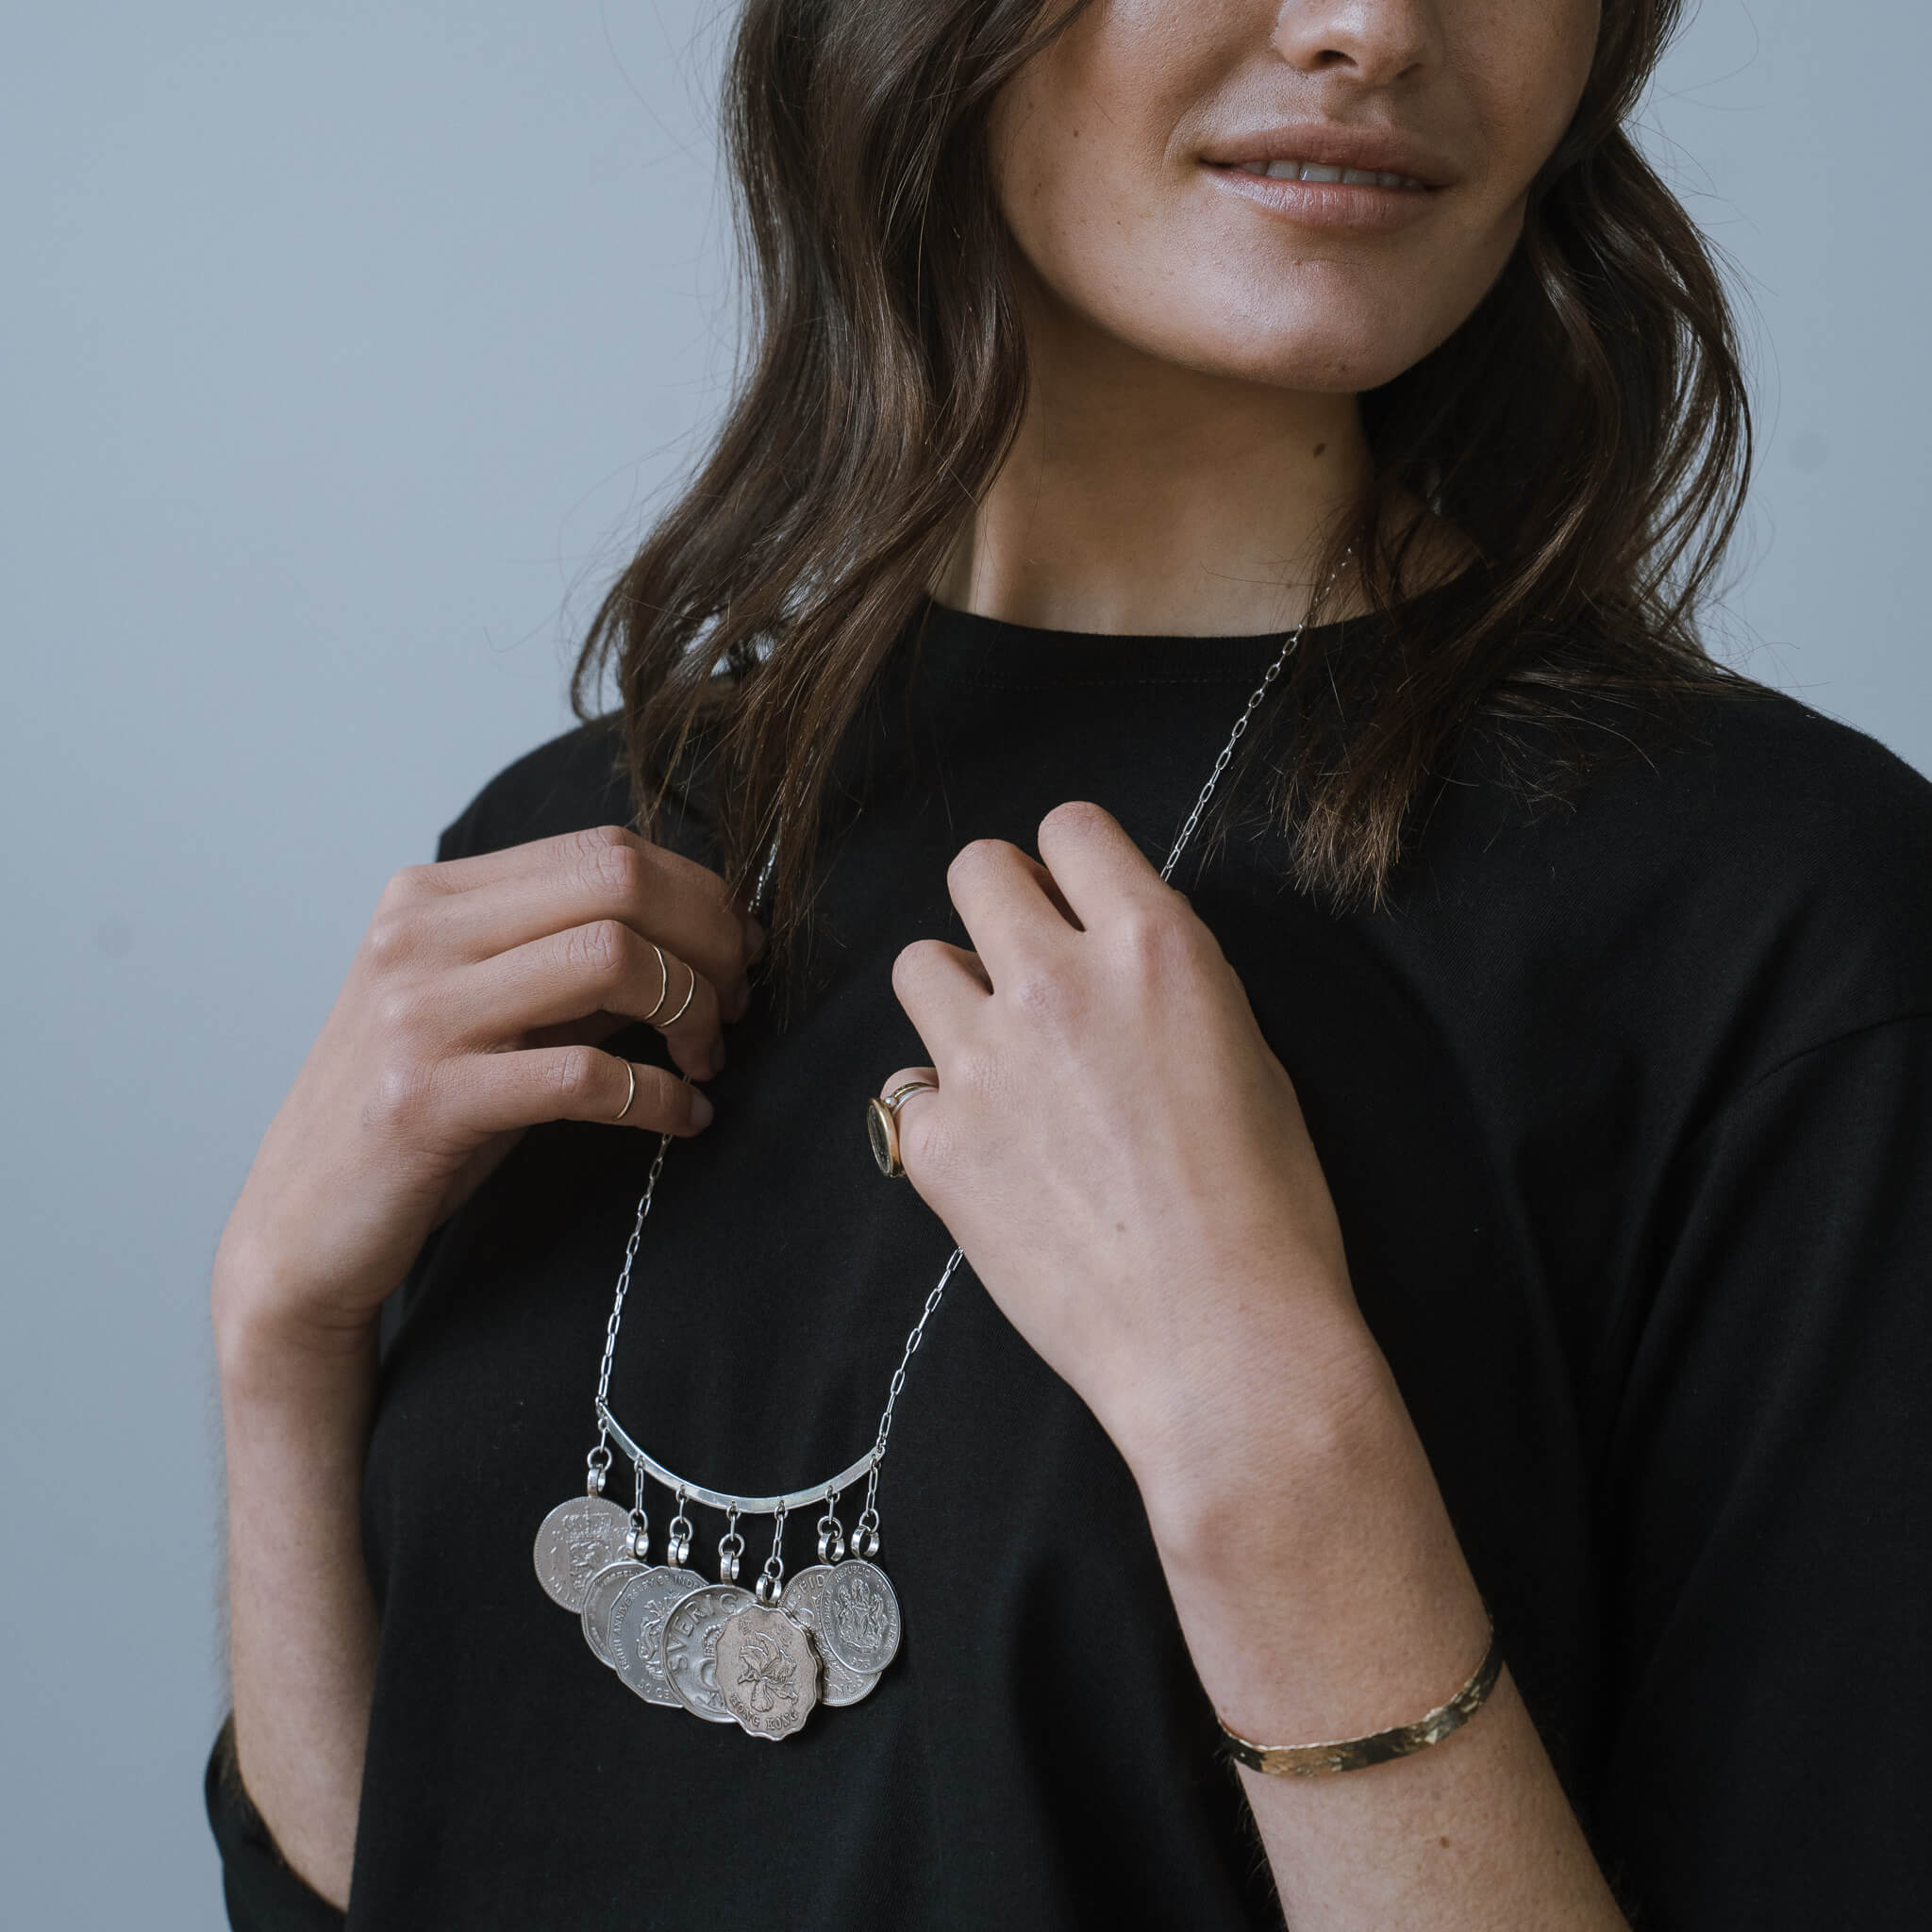 she-who-wanders-coin-necklace-14